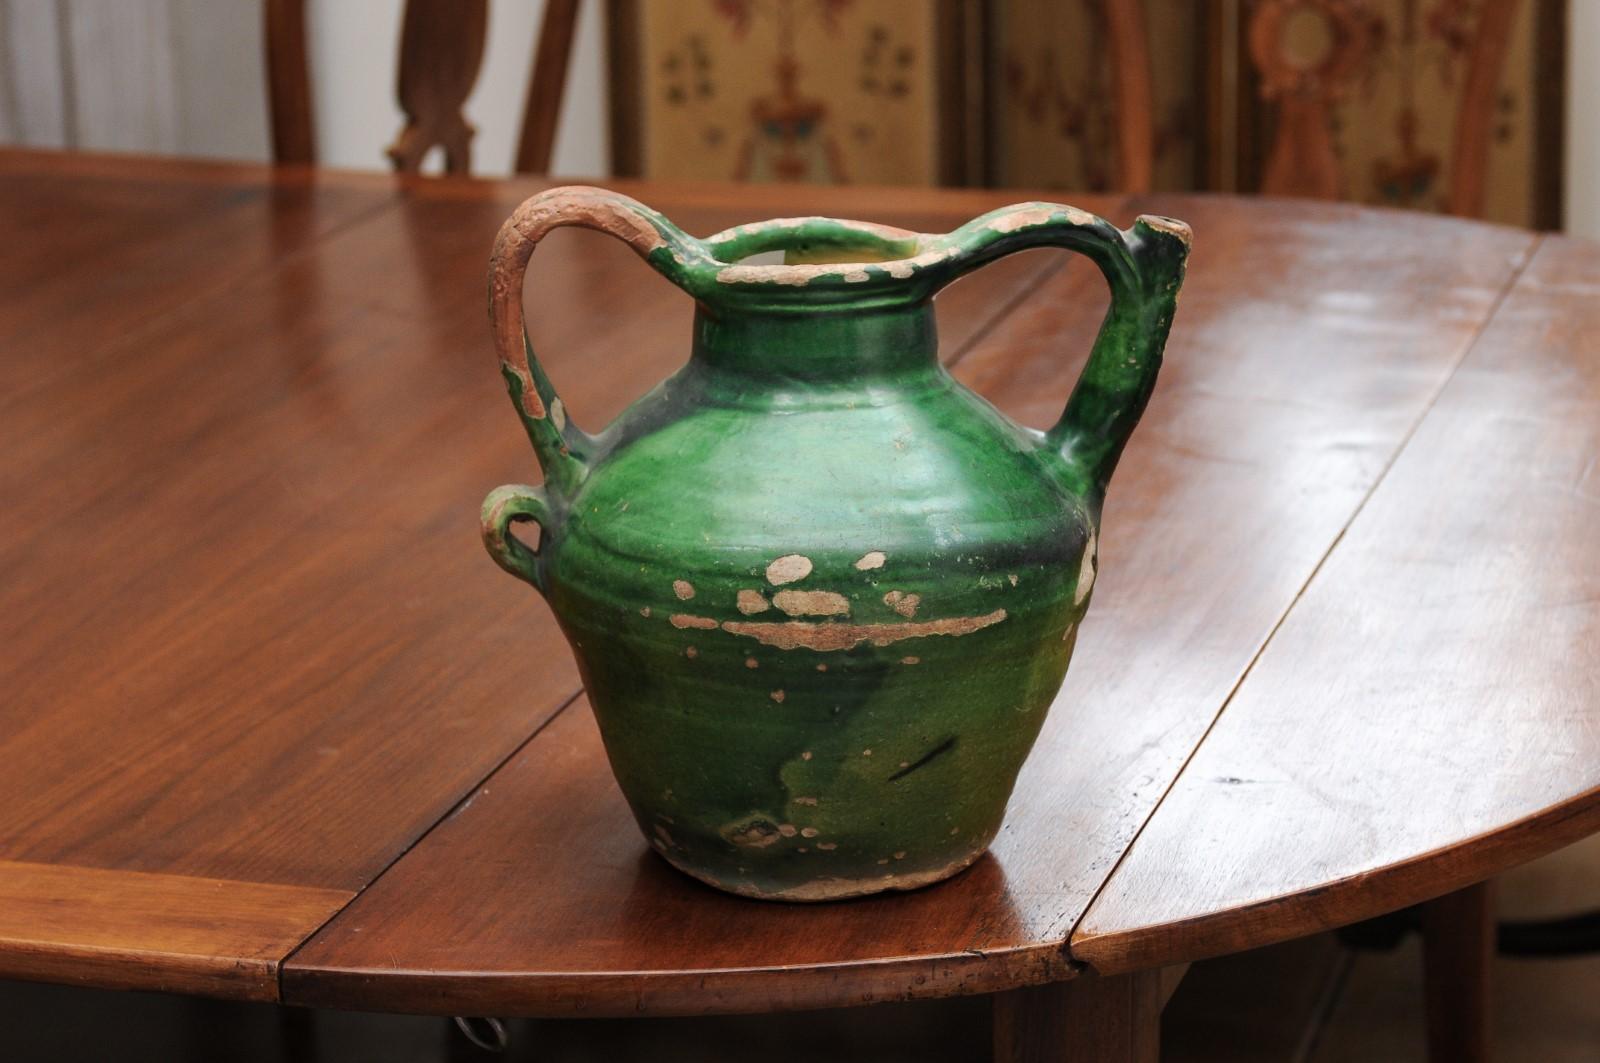 A French provincial green glazed pottery olive oil jug from the mid-19th century, with double handles, front spout and distressed patina. Created in Southern France at the beginning of Emperor Napoleon III's reign, this jug features a green glazed